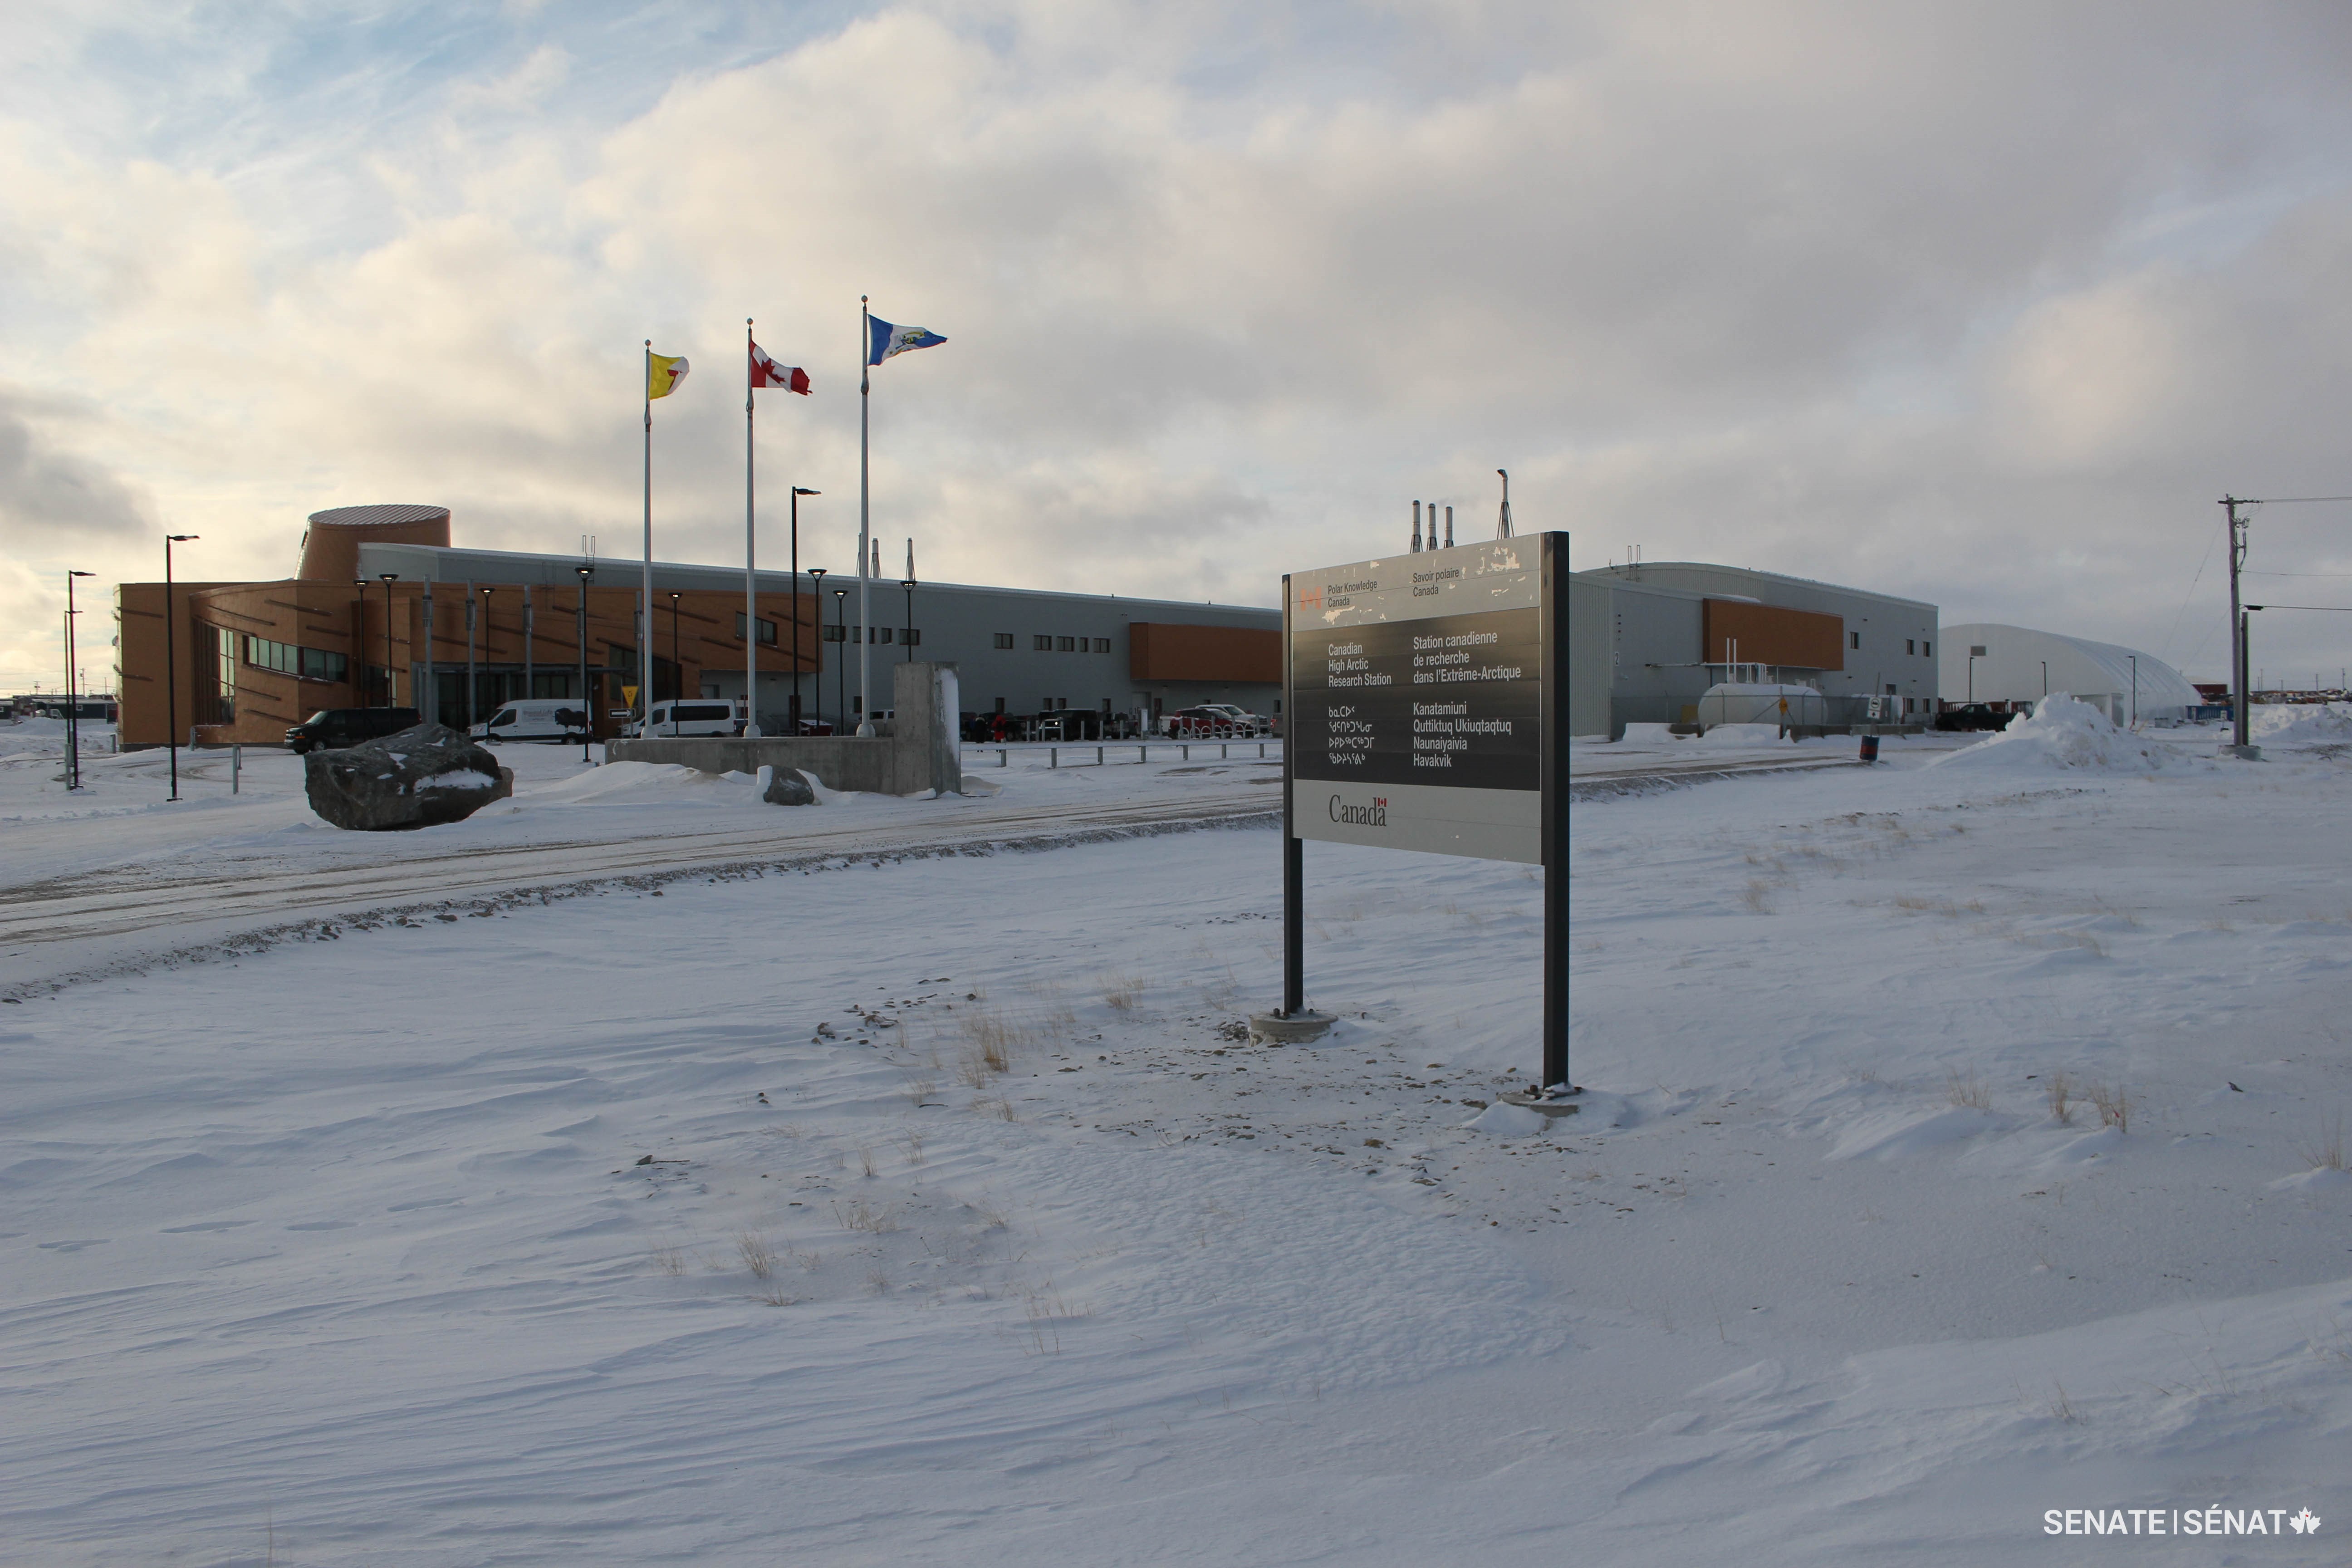 Cambridge Bay, on Victoria Island in Nunavut, might be north of the Arctic Circle but it still boasts a state-of-the-art science facility: the Canadian High Arctic Research Station, operated by Polar Knowledge Canada.